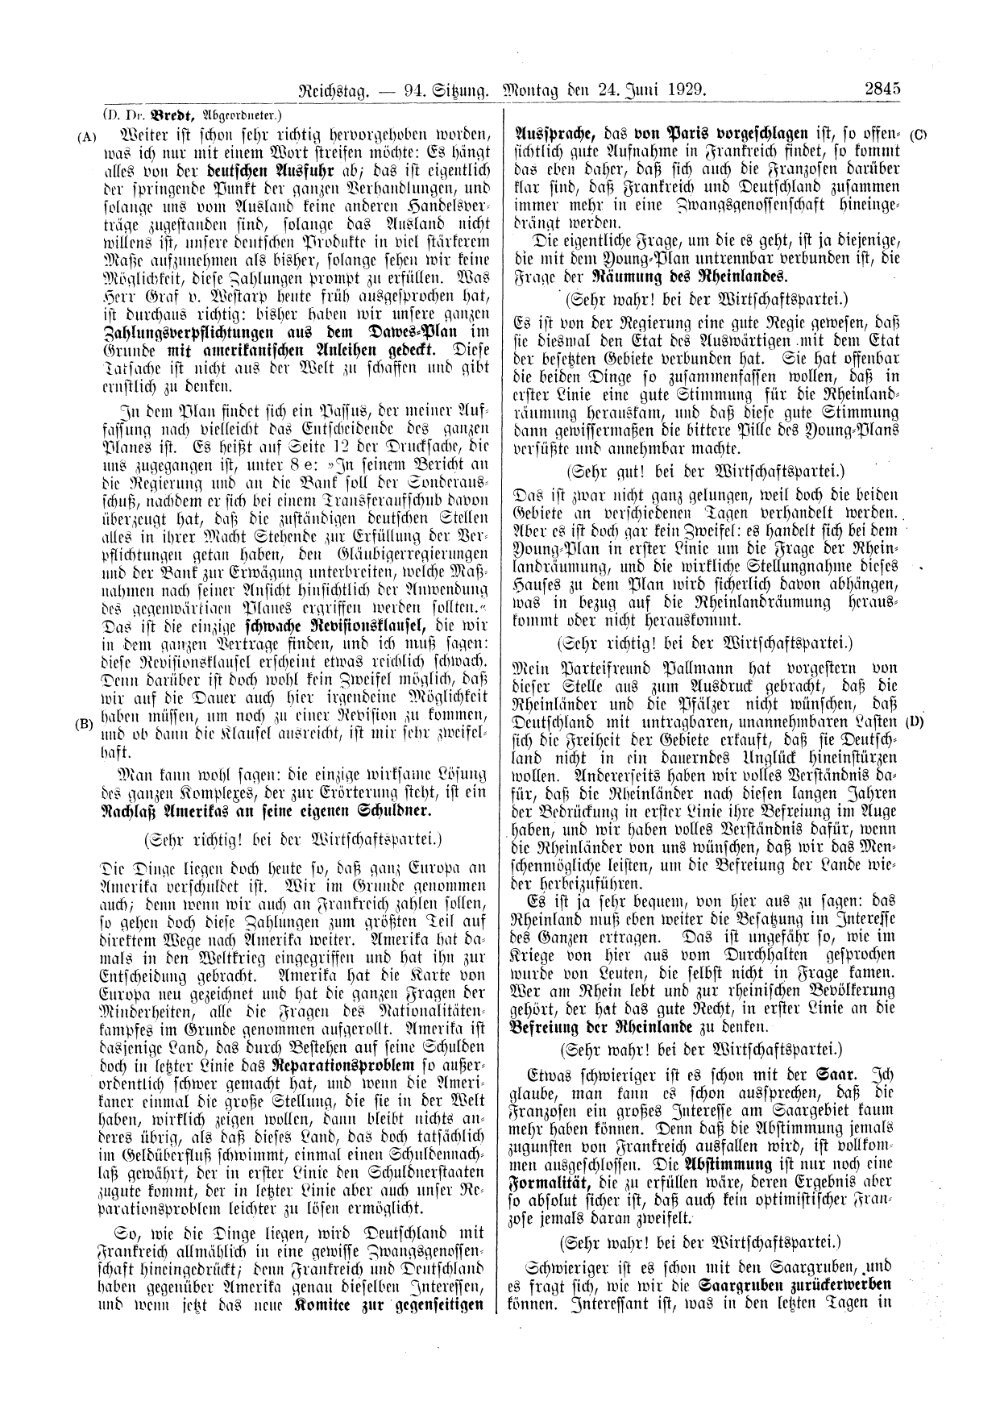 Scan of page 2845